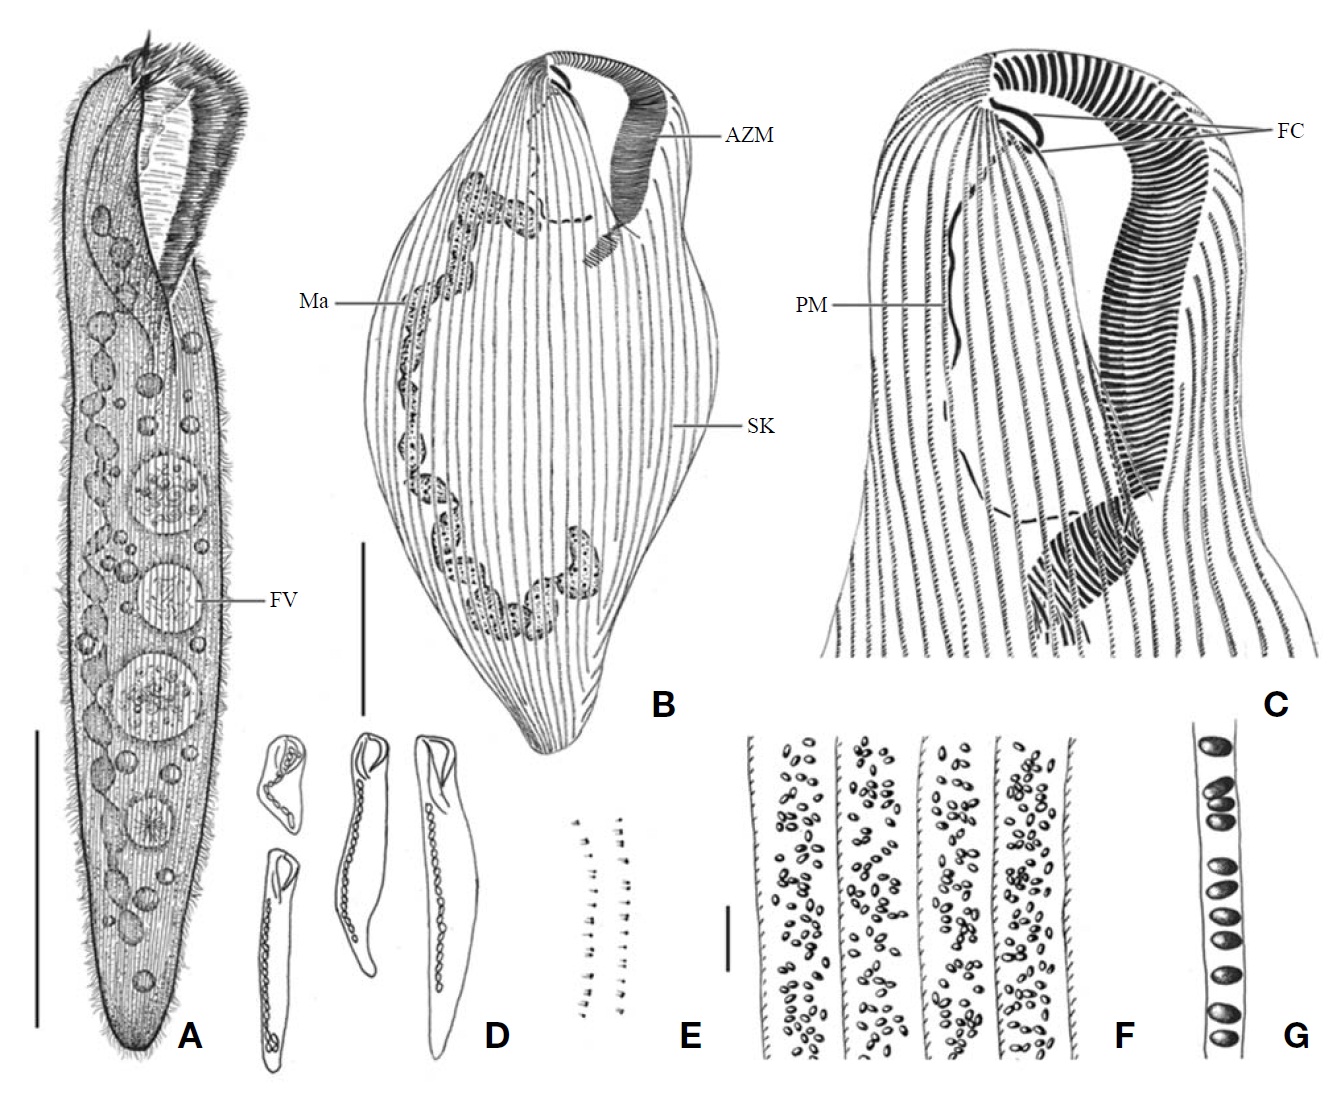 Morphology and infraciliature of Condylostoma spatiosum from live specimens (A, D-G) and after protargol impregnation (B, C). A, Ventral view of a typical individual; B, Ventral view of impregnated specimen; C, Ventral view of buccal field; D, Various body shape and macronuclear nodules pattern; E, Infraciliature of somatic dikinetids; F, Pattern of cortical granules; G, Lateral view of cortical granules. AZM, adoral zone of membranelles; FC, frontal cirrus; FV, food vacuole; Ma, macronucleus; PM, paroral membrane; SK, somatic kineties. Scale bars: A=200 μm, B=100 μm, F=5 μm.